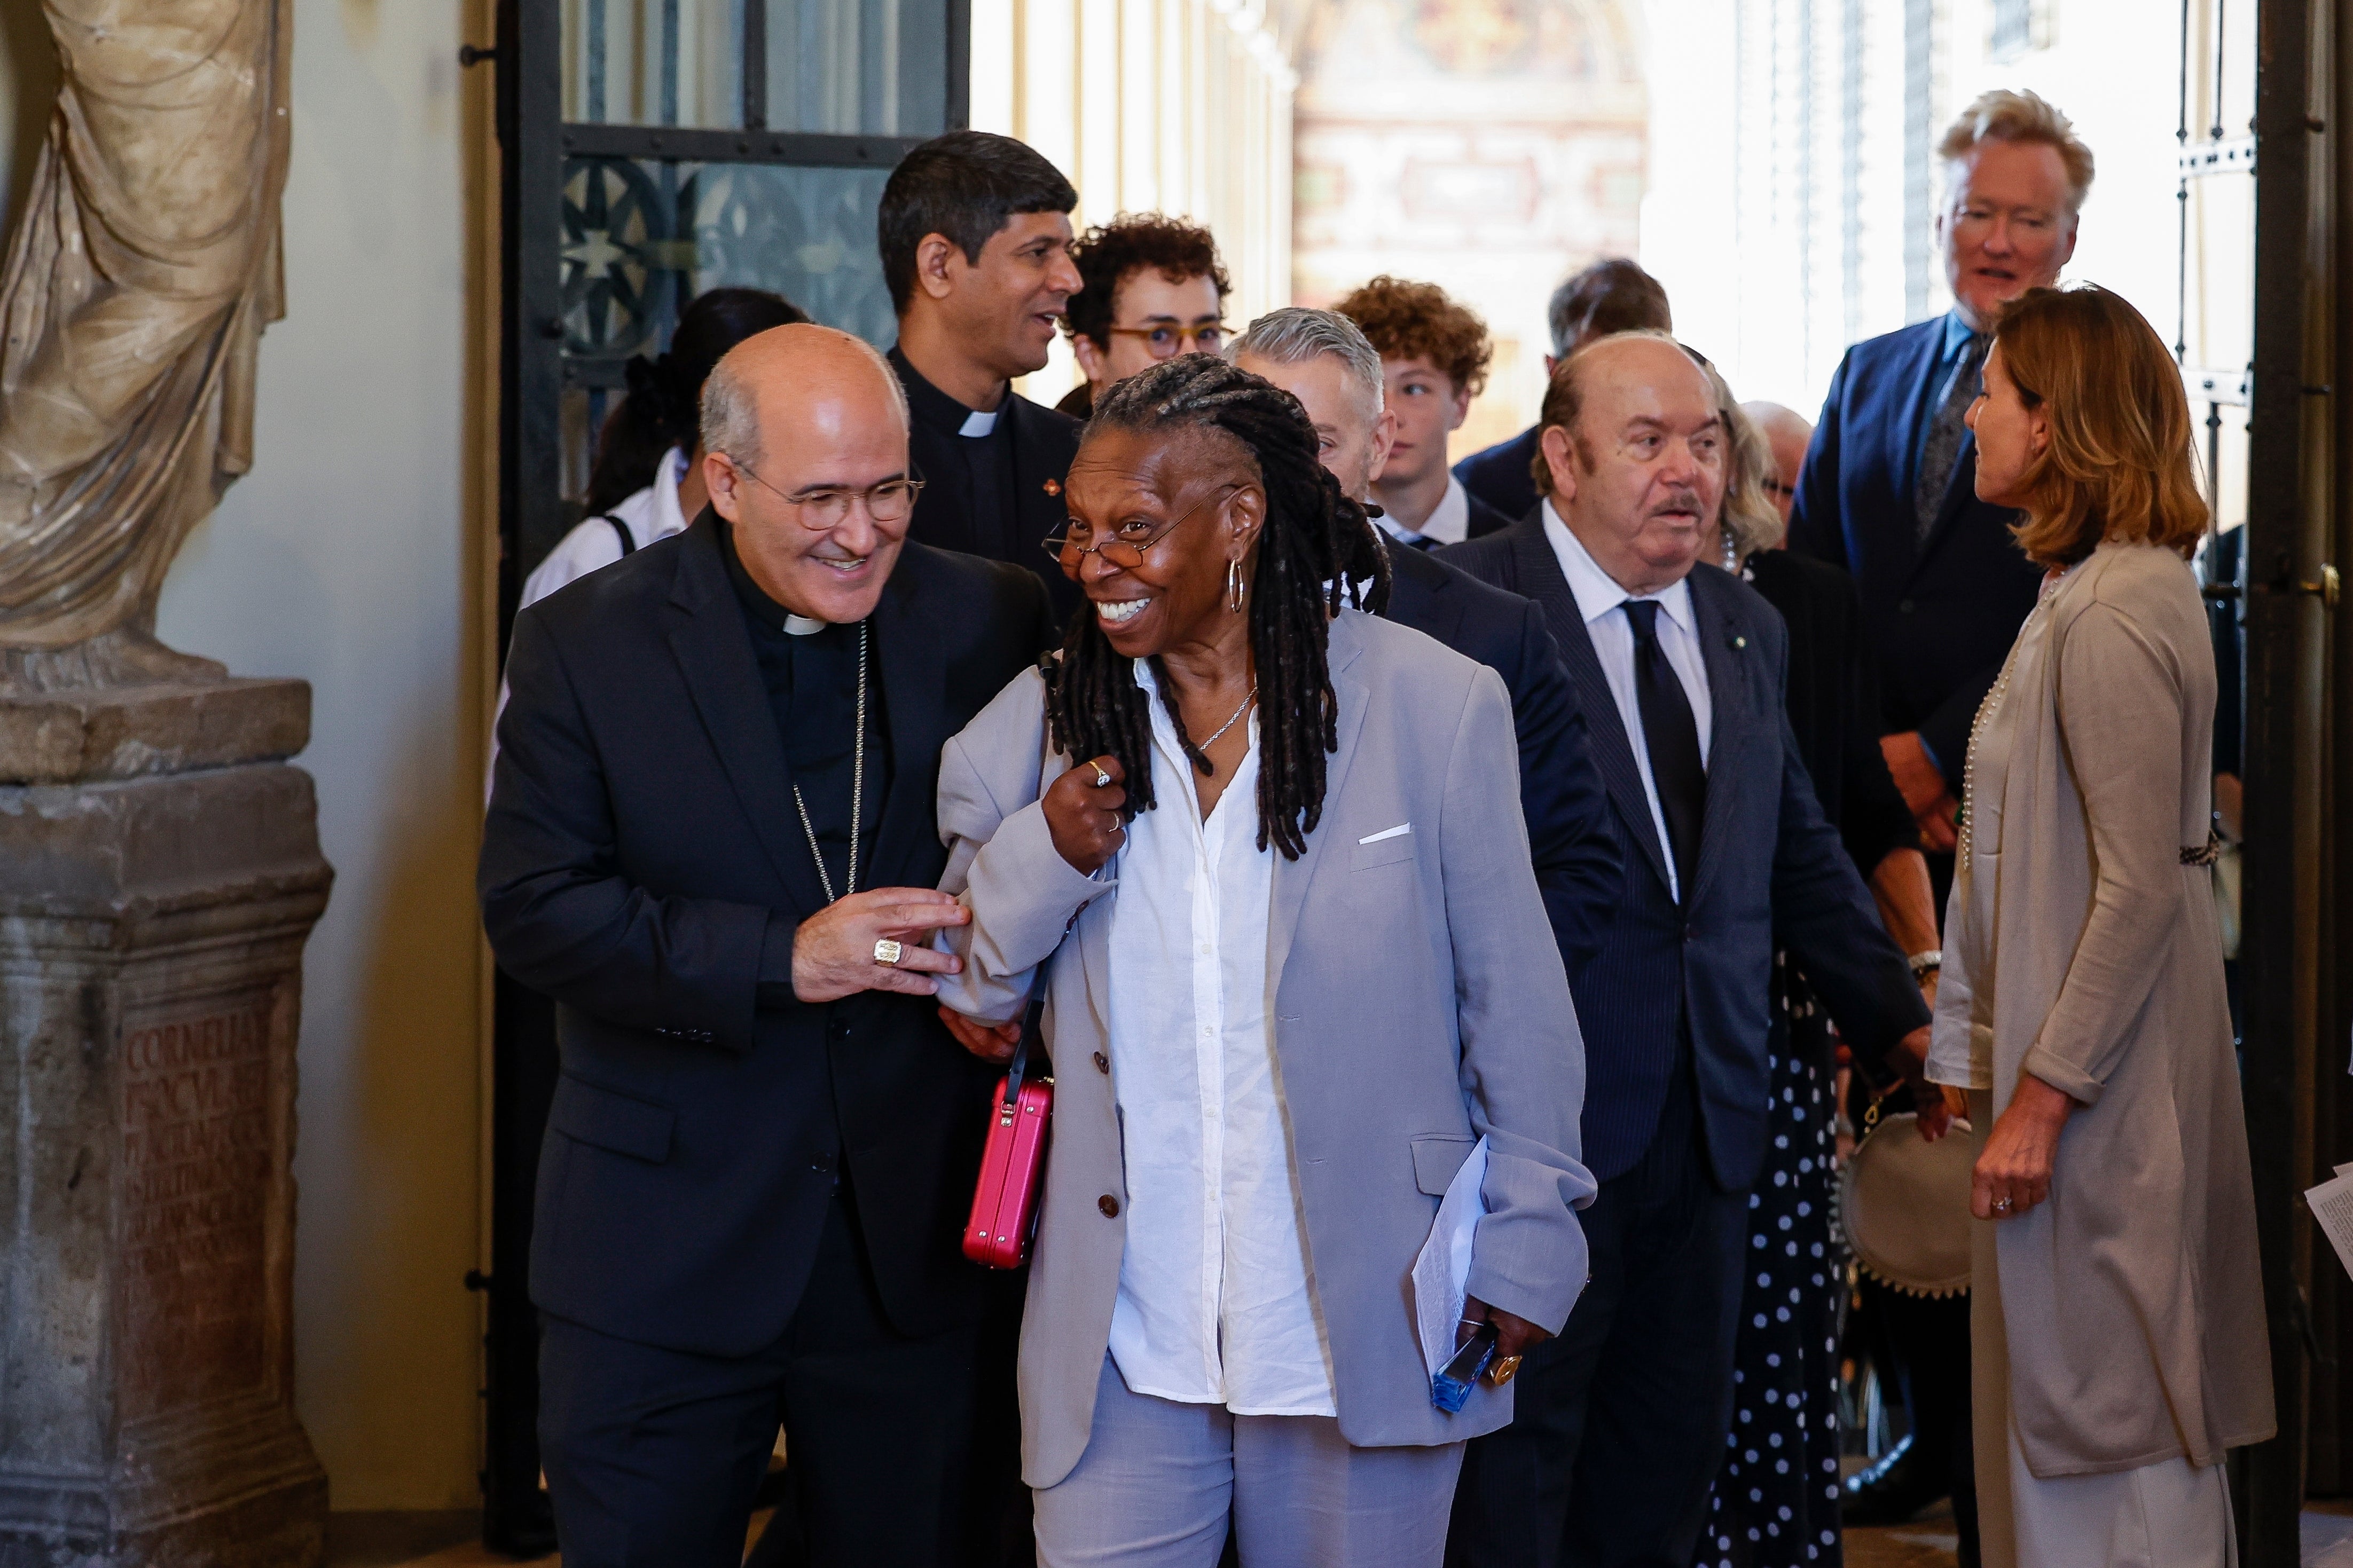 Whoopi Goldberg, centre, leaves after an audience with Pope Francis in Clementine Hall